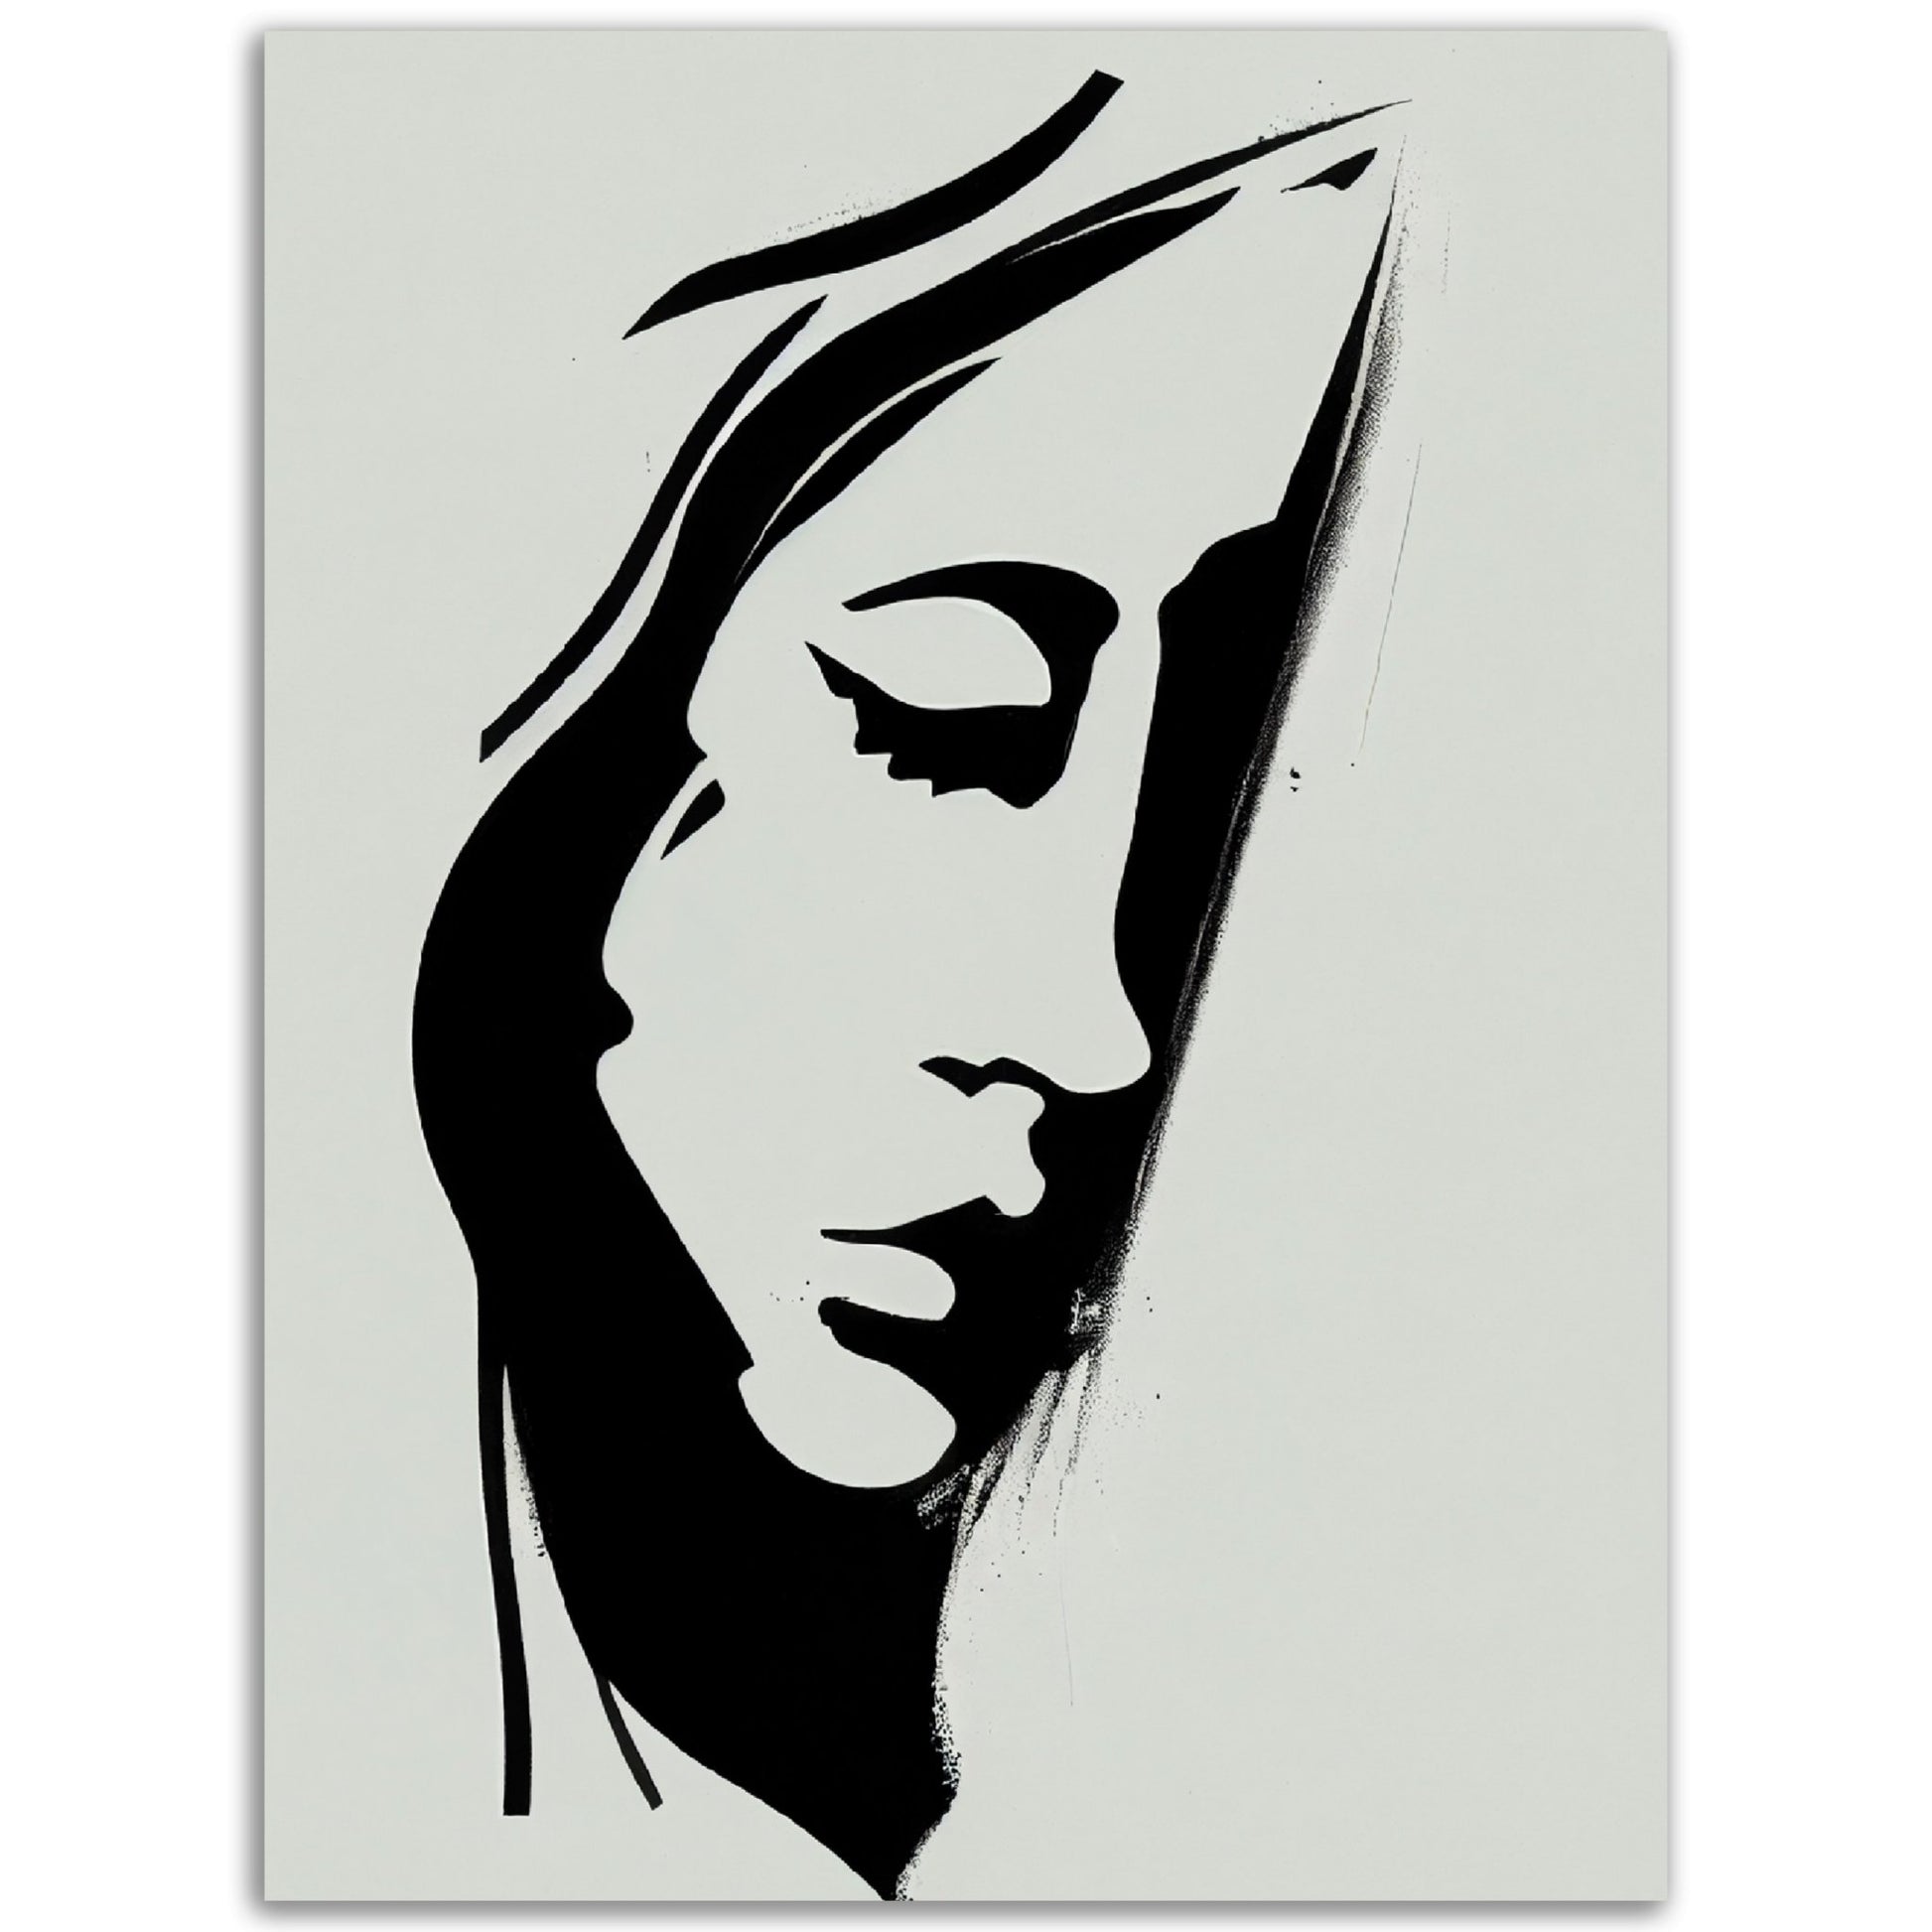 A high-quality black and white drawing of Pondering Girl's face, perfect for posters for room or poster wall art.